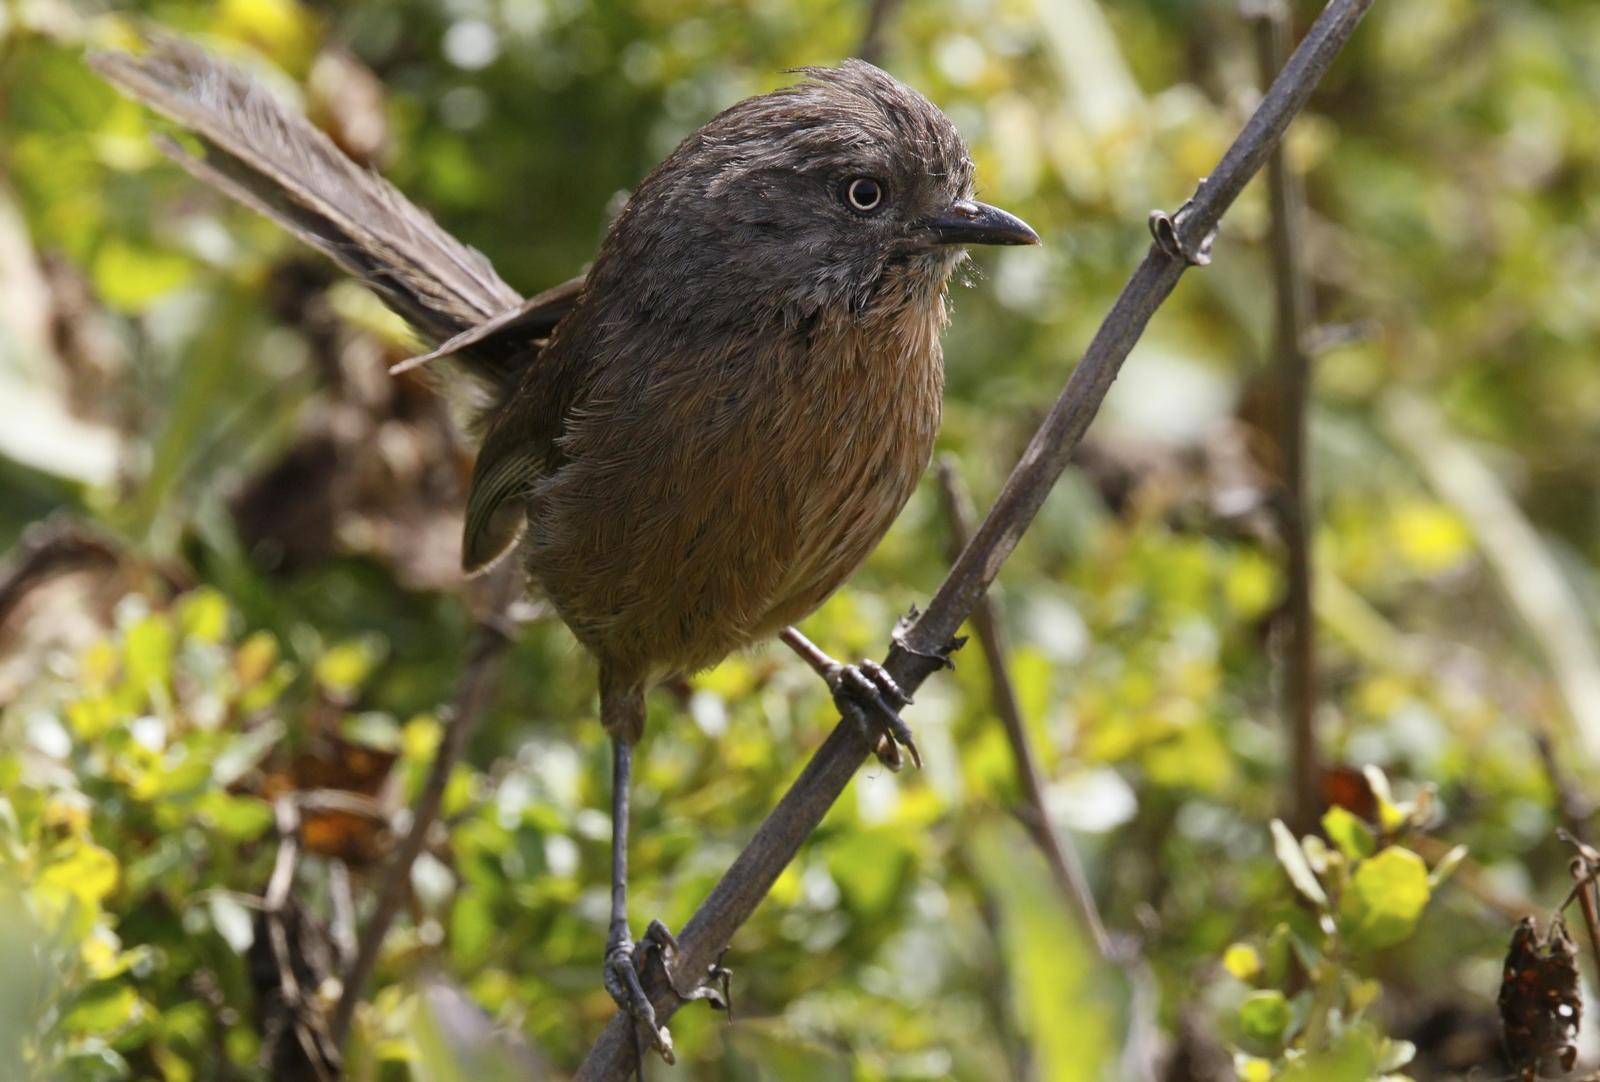 Wrentit Photo by Emily Willoughby